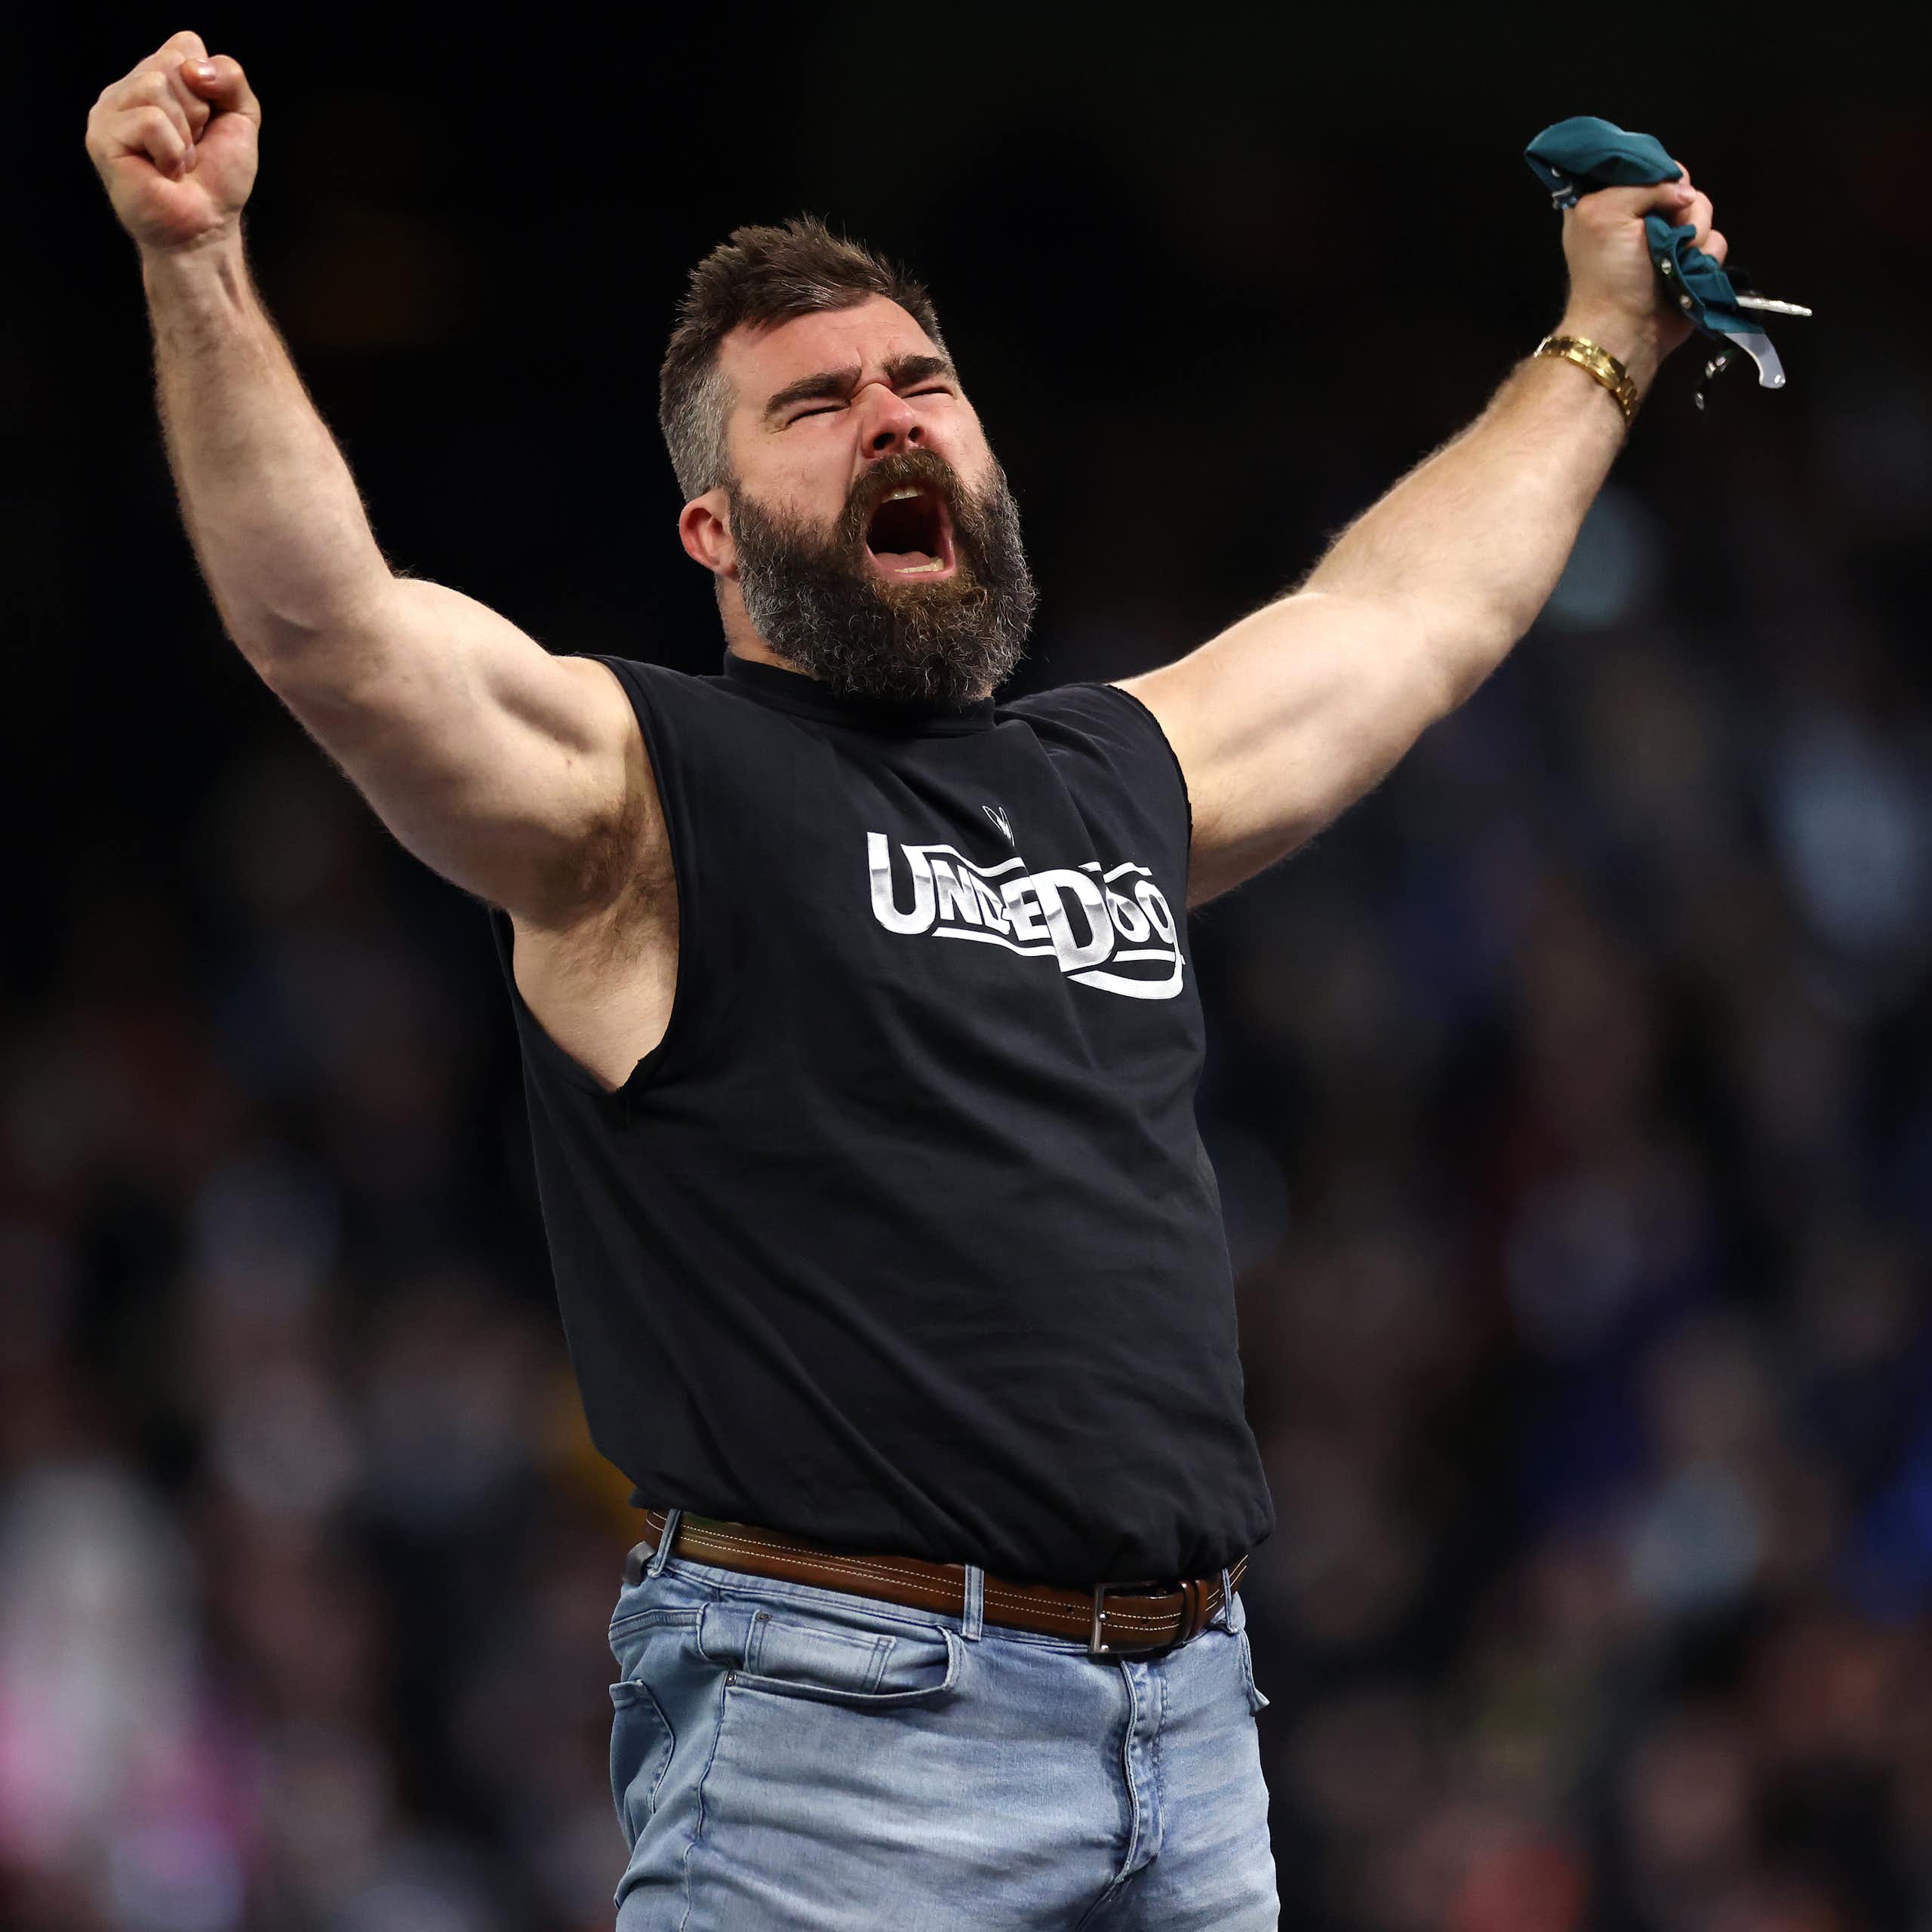 Former NFL player Jason Kelce reacts following a match during Night One of WrestleMania 40 in Philadelphia